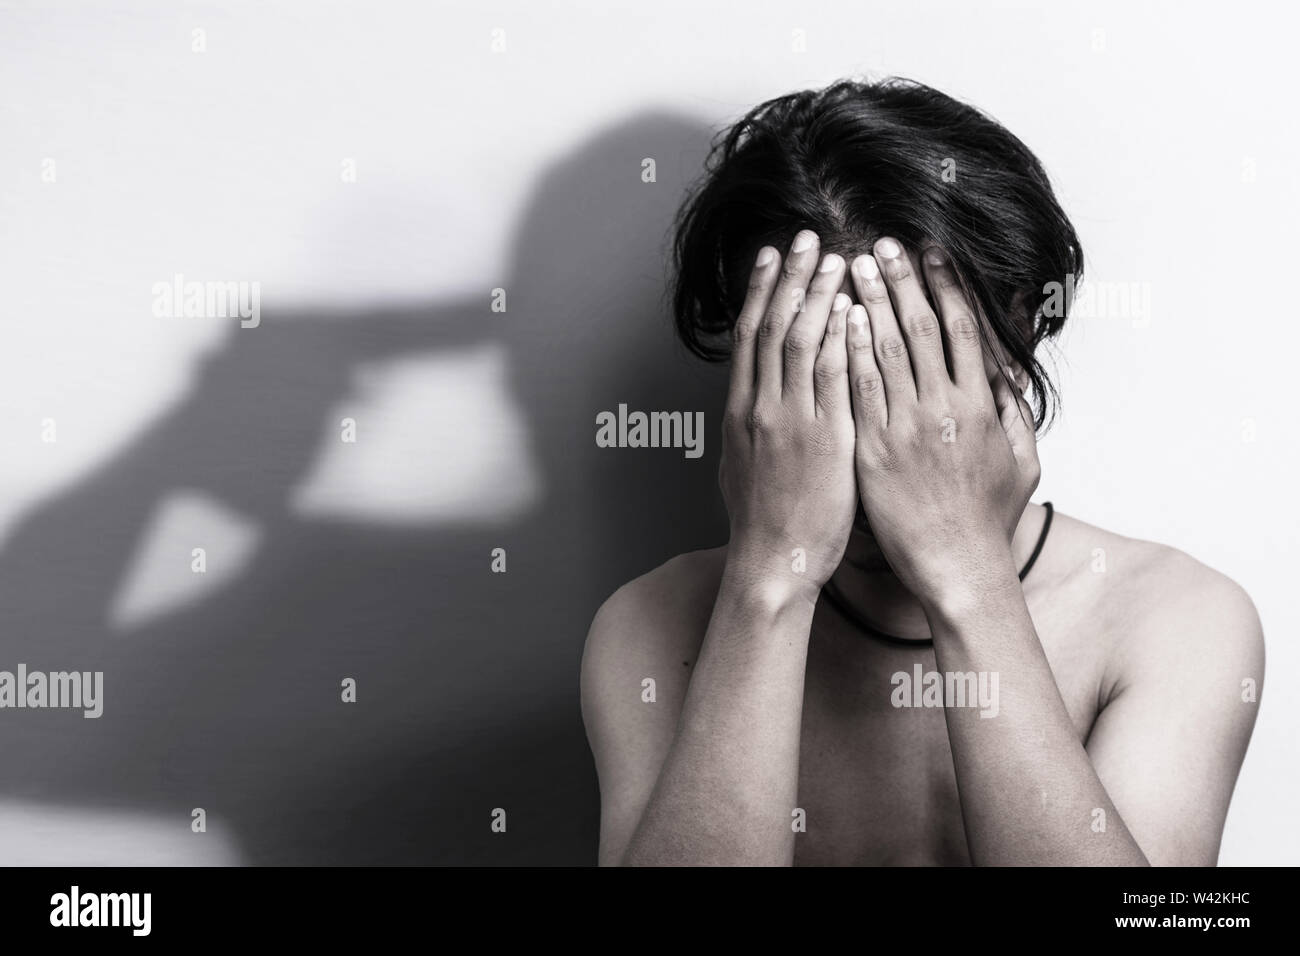 man with depression sitting head in hands with shadow of gun that was pointing his head, thinking to commit suicide. depression anxiety and bully vict Stock Photo